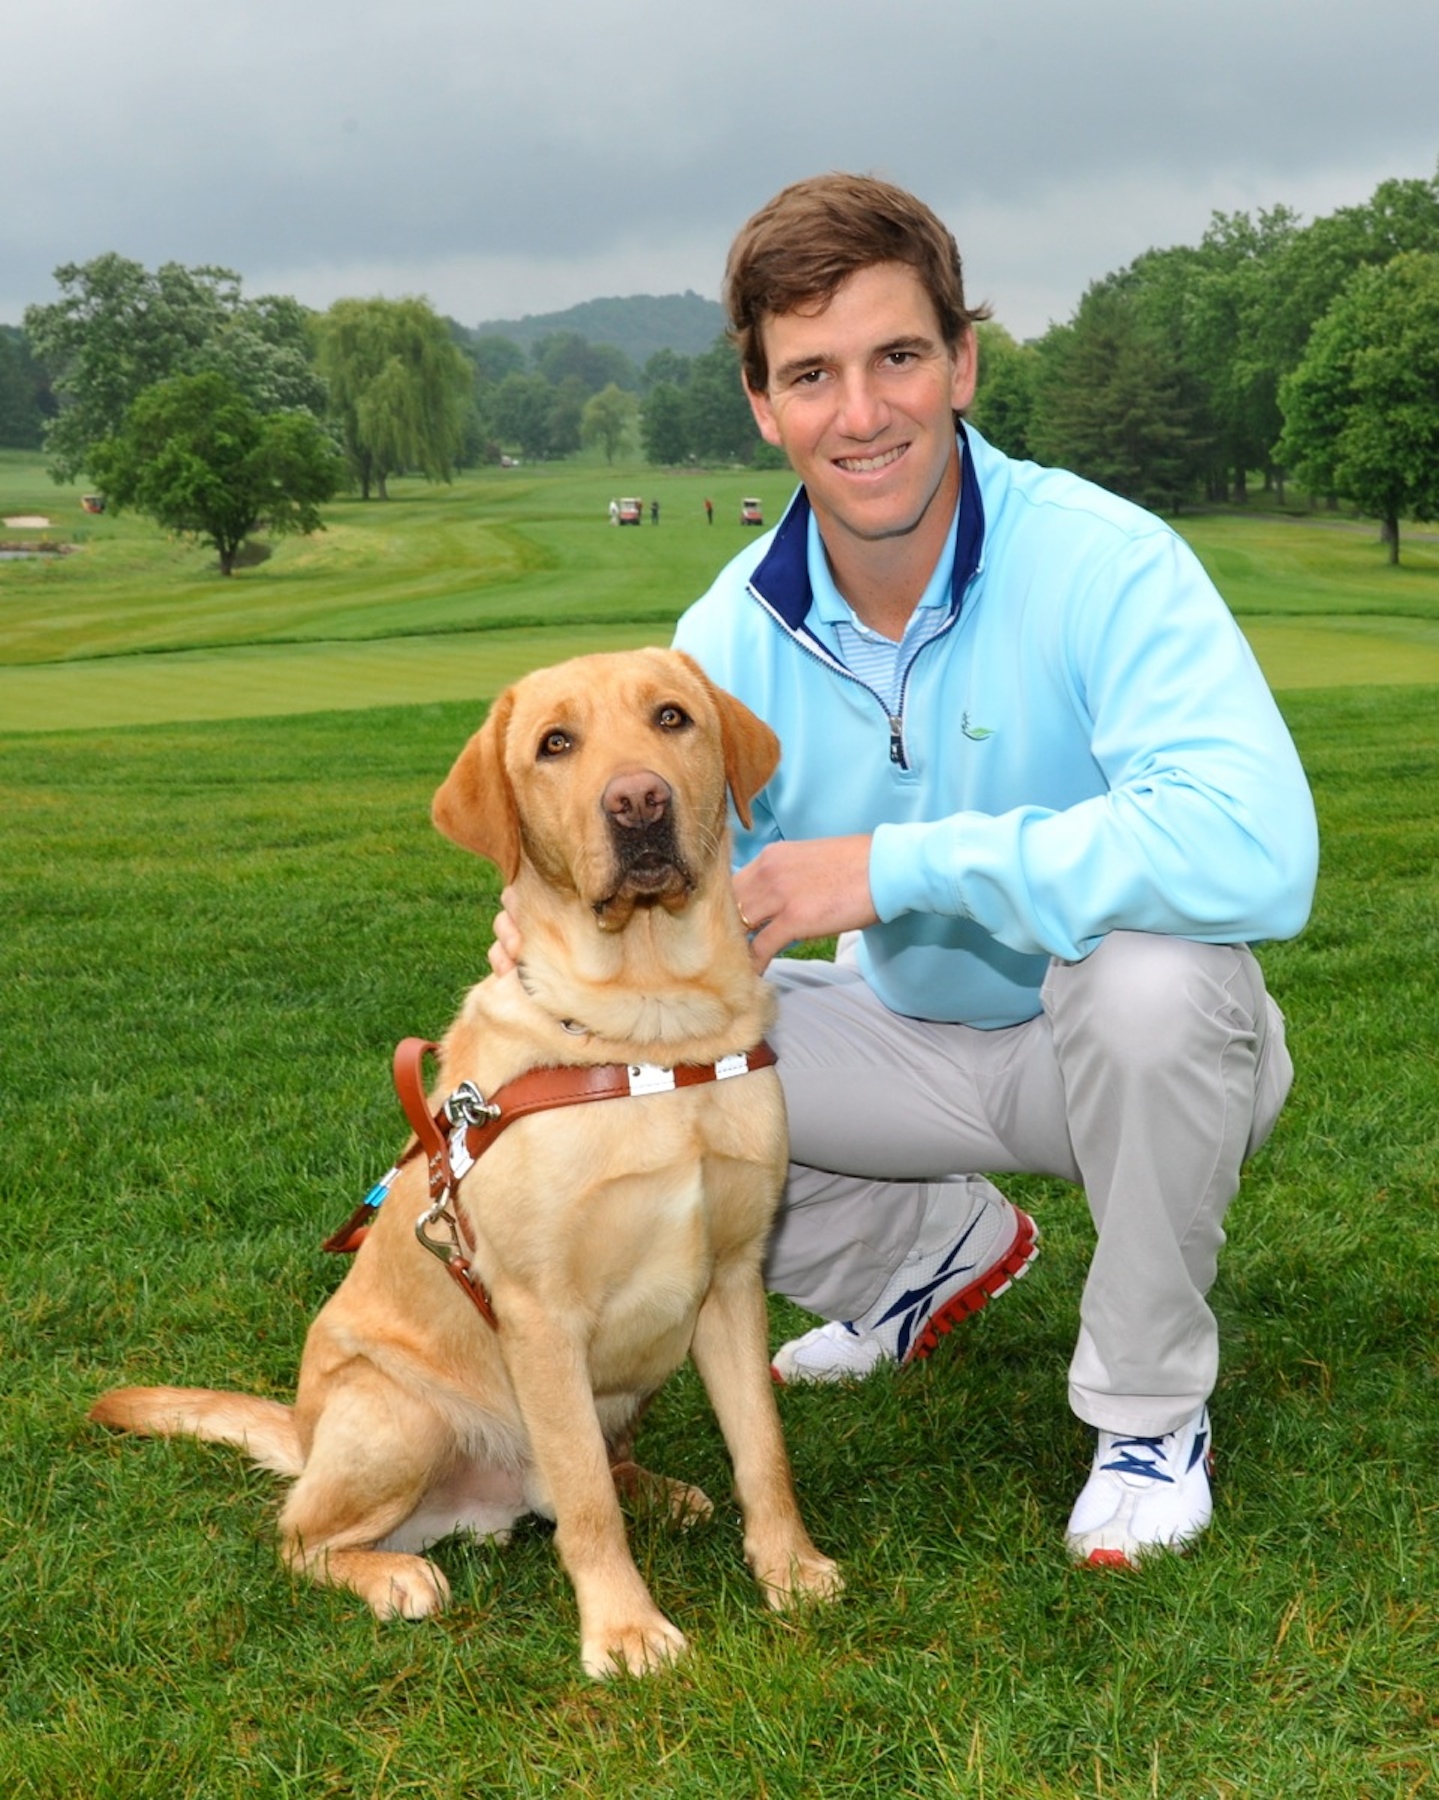 37th Annual Guiding Eyes Golf Classic With NY Giants Quarterback Eli Manning Tees Off ...1439 x 1800